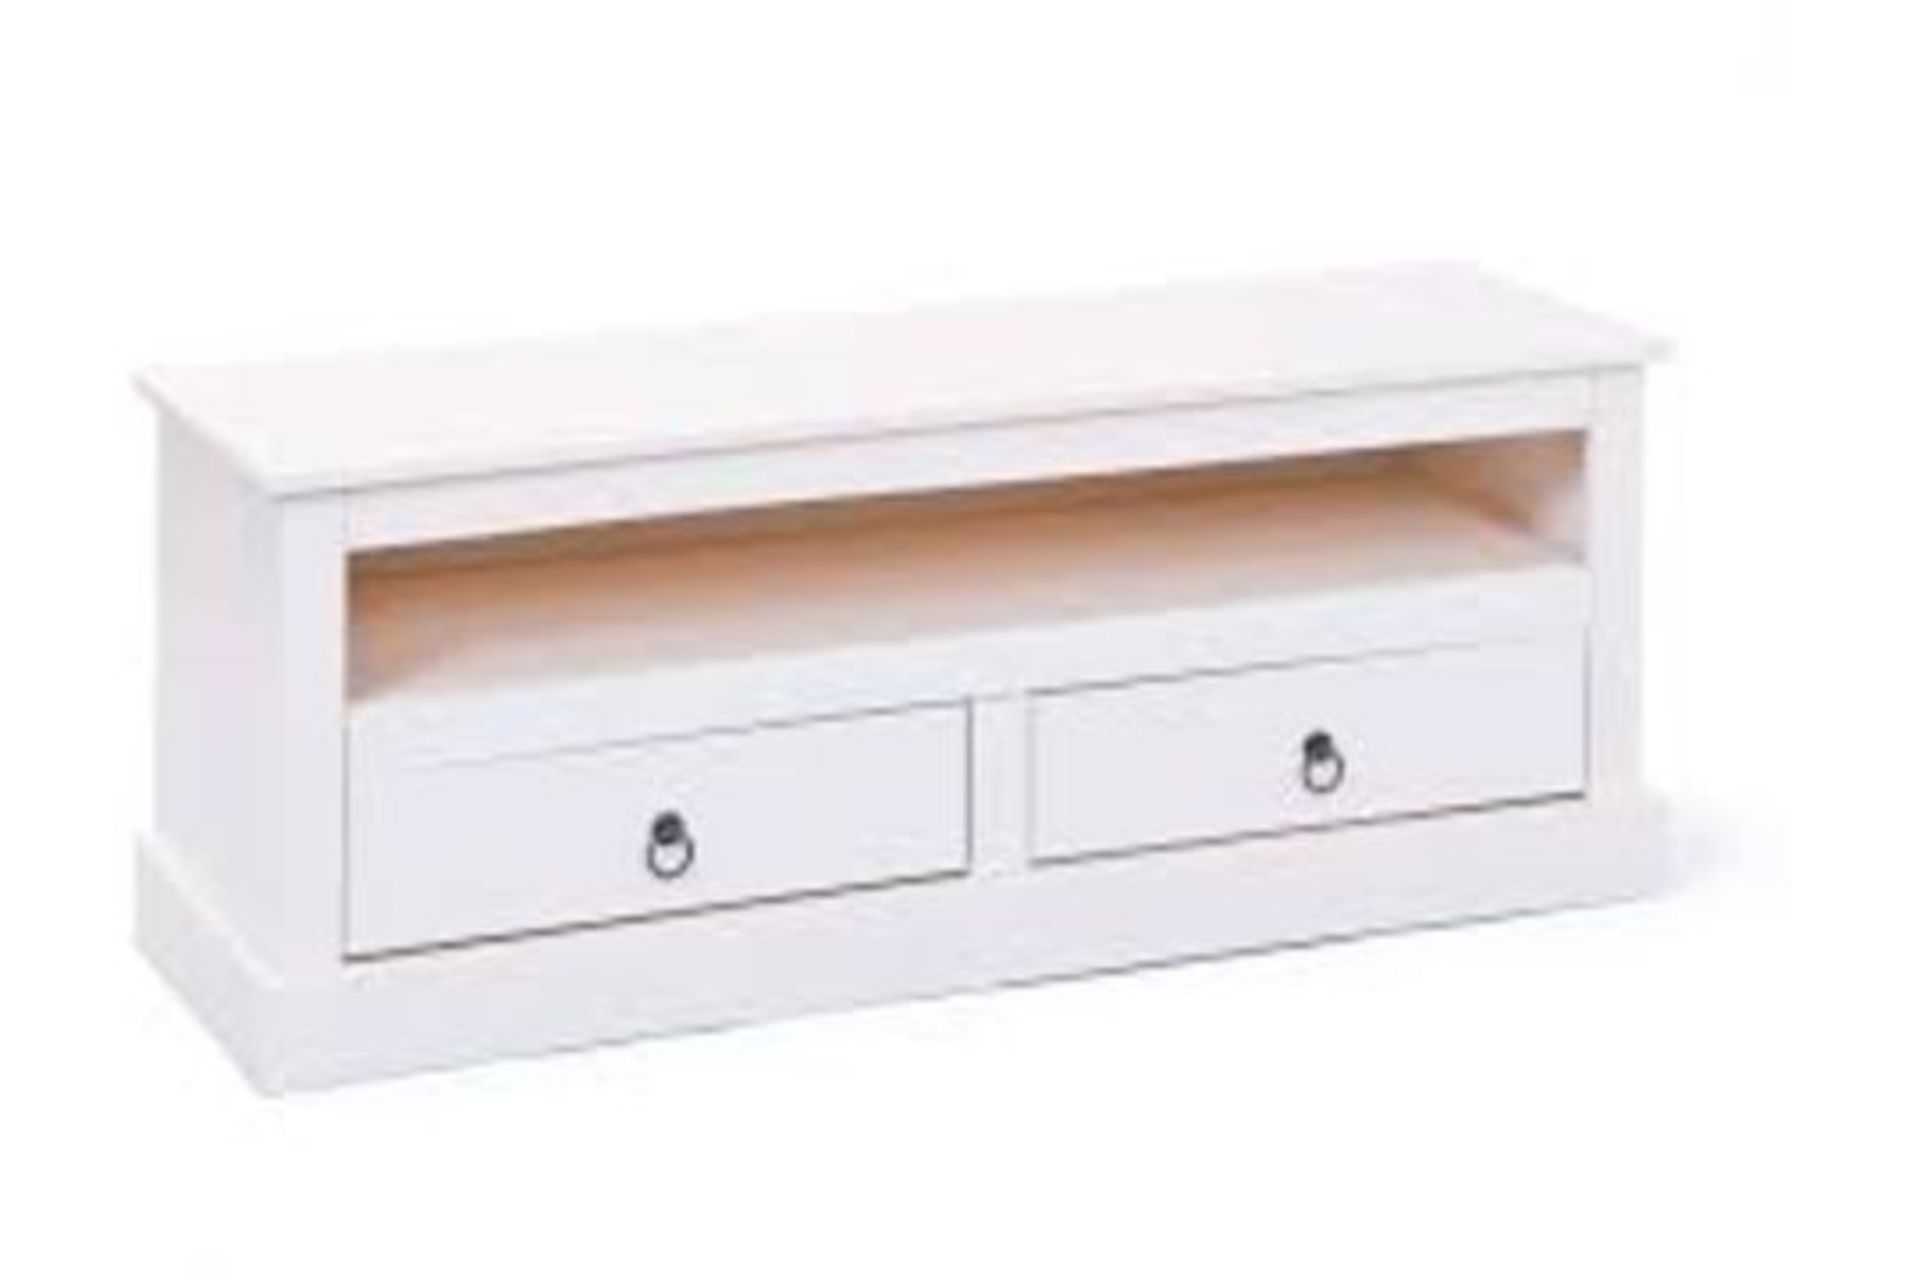 Boxed Provence 3 TV Unit In Cream RRP £250 (Pictures Are For Illustration Purposes Only) (Appraisals